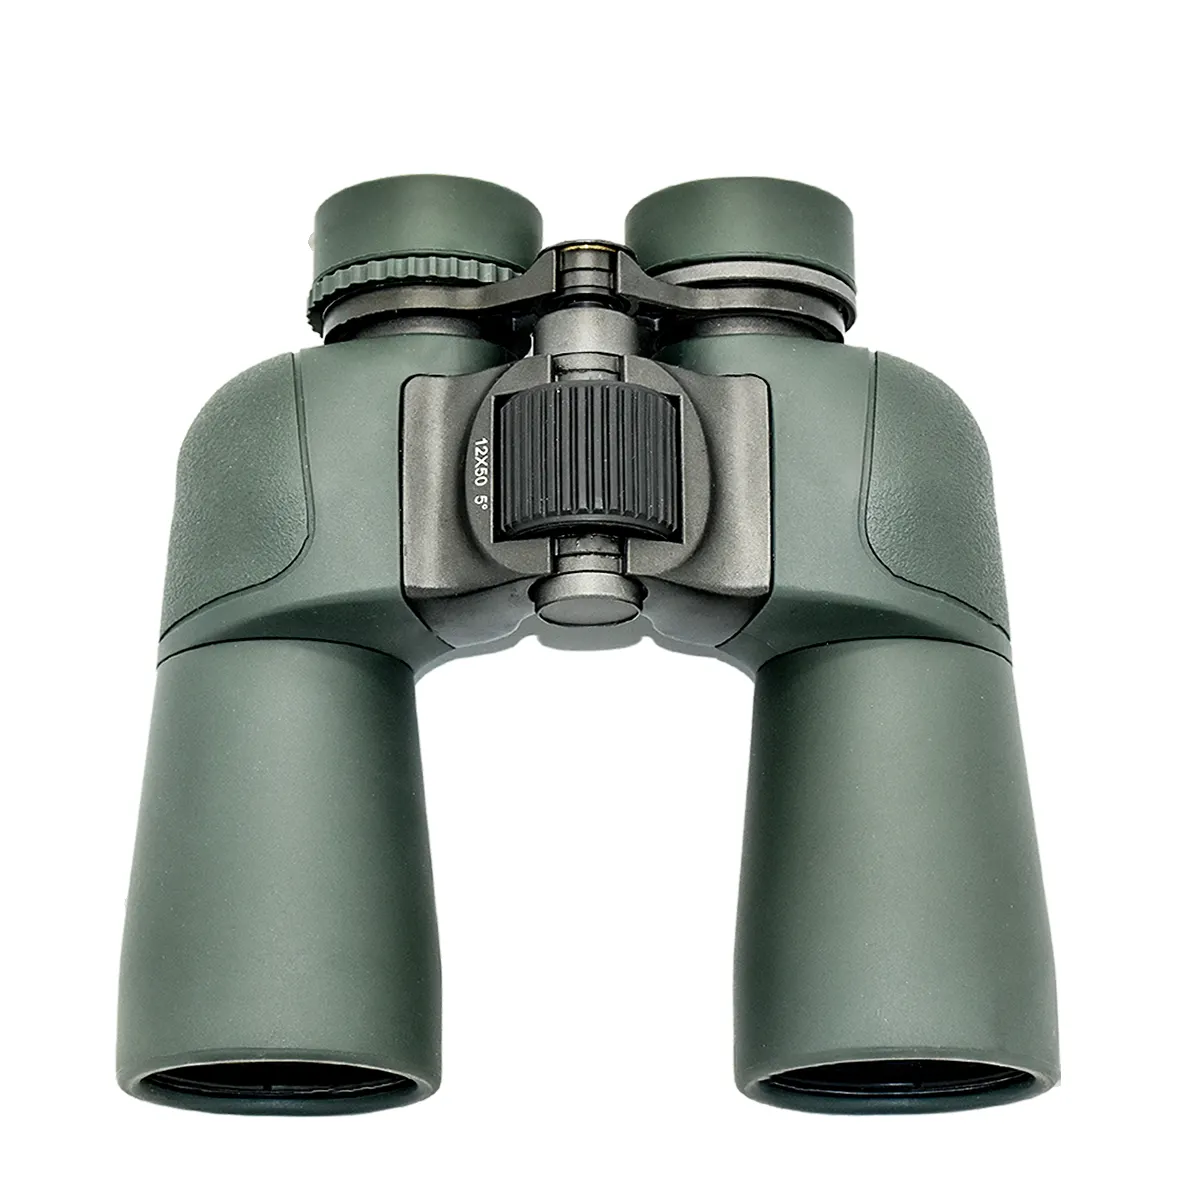 2021Fine definition image big view12x50 travel watching brid binocular by waterproof bak4 prism with see long-distance tourist